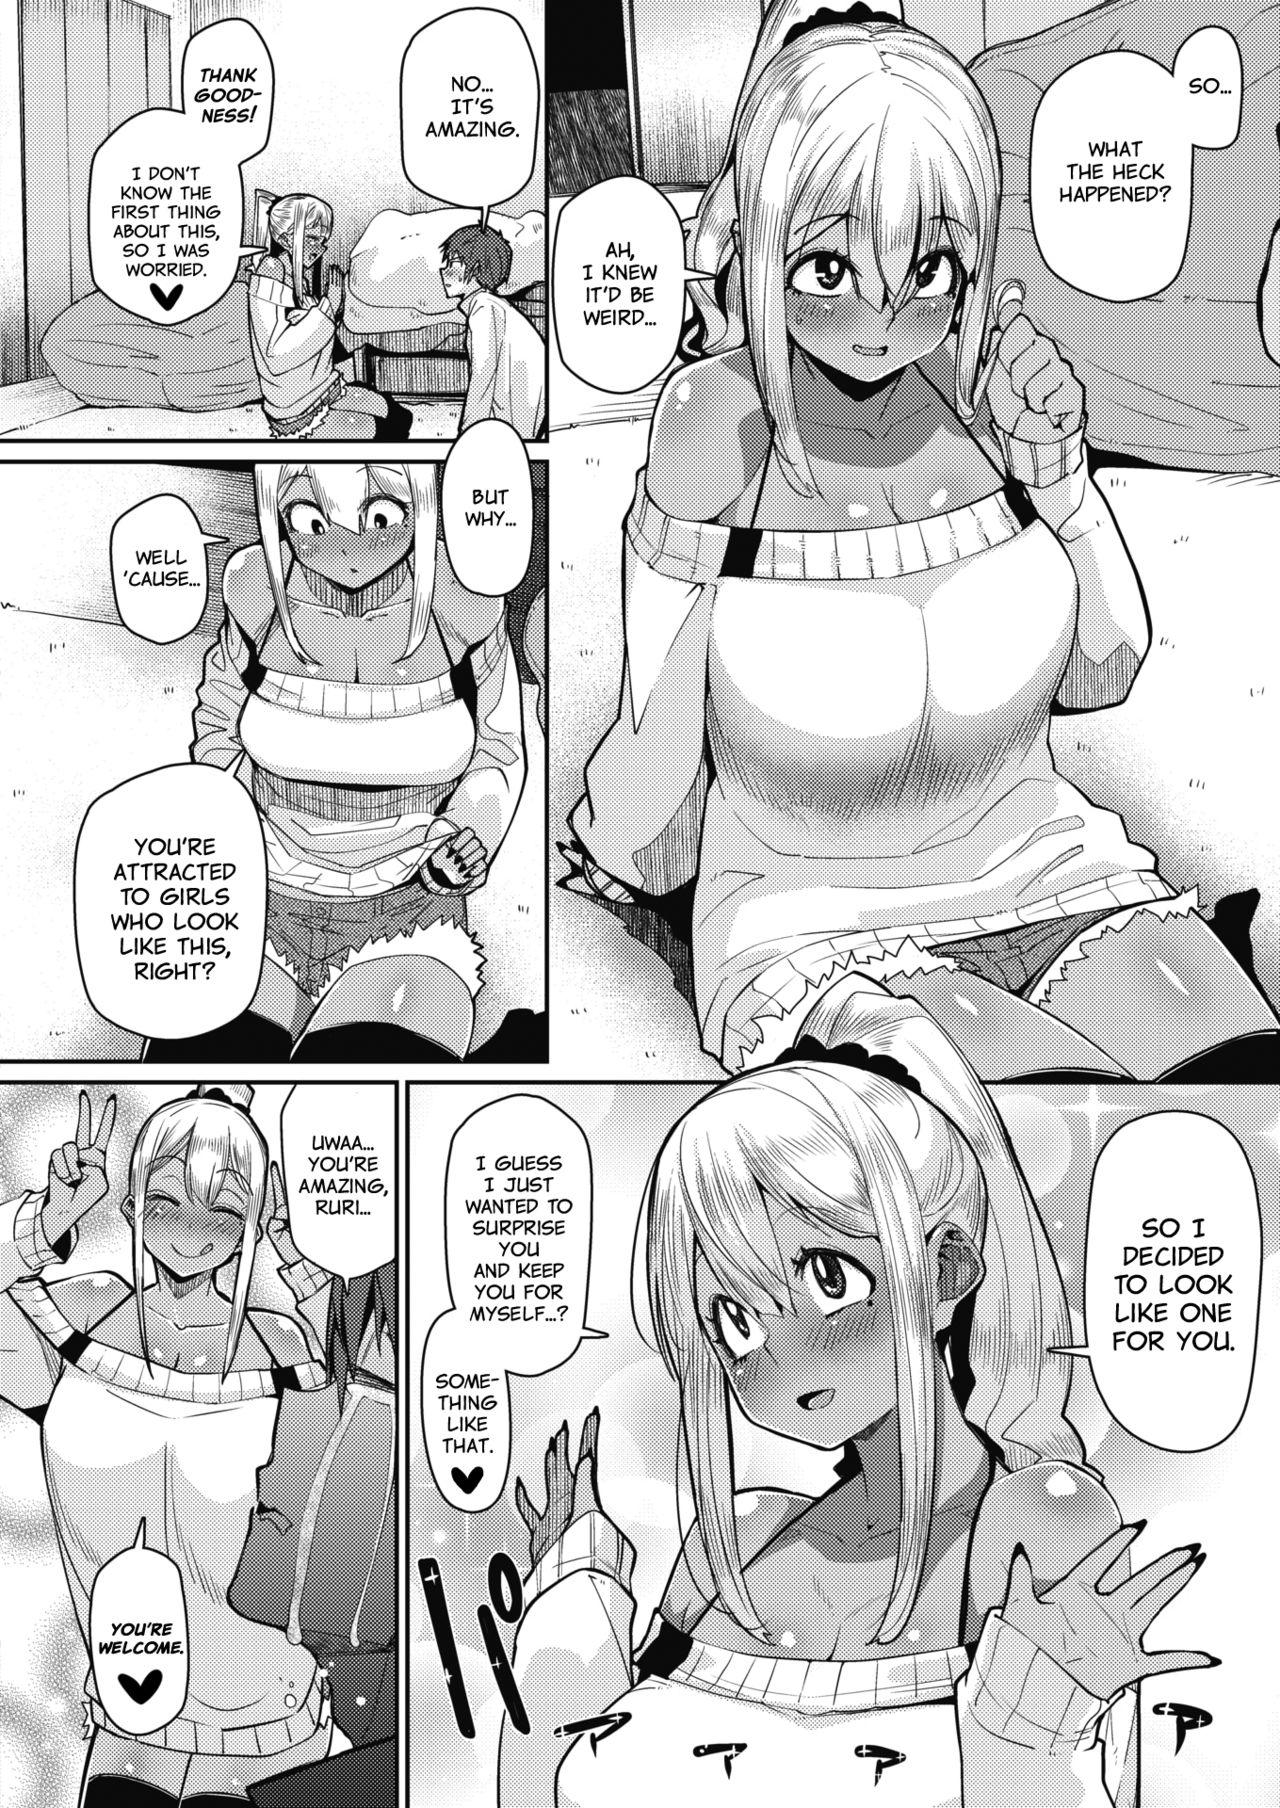 Dutch Gekkan "The Bitch" o Mita Onna no Hannou ni Tsuite | About the Reaction of the Girl Who Saw "The Bitch Monthly" Sucks - Page 4